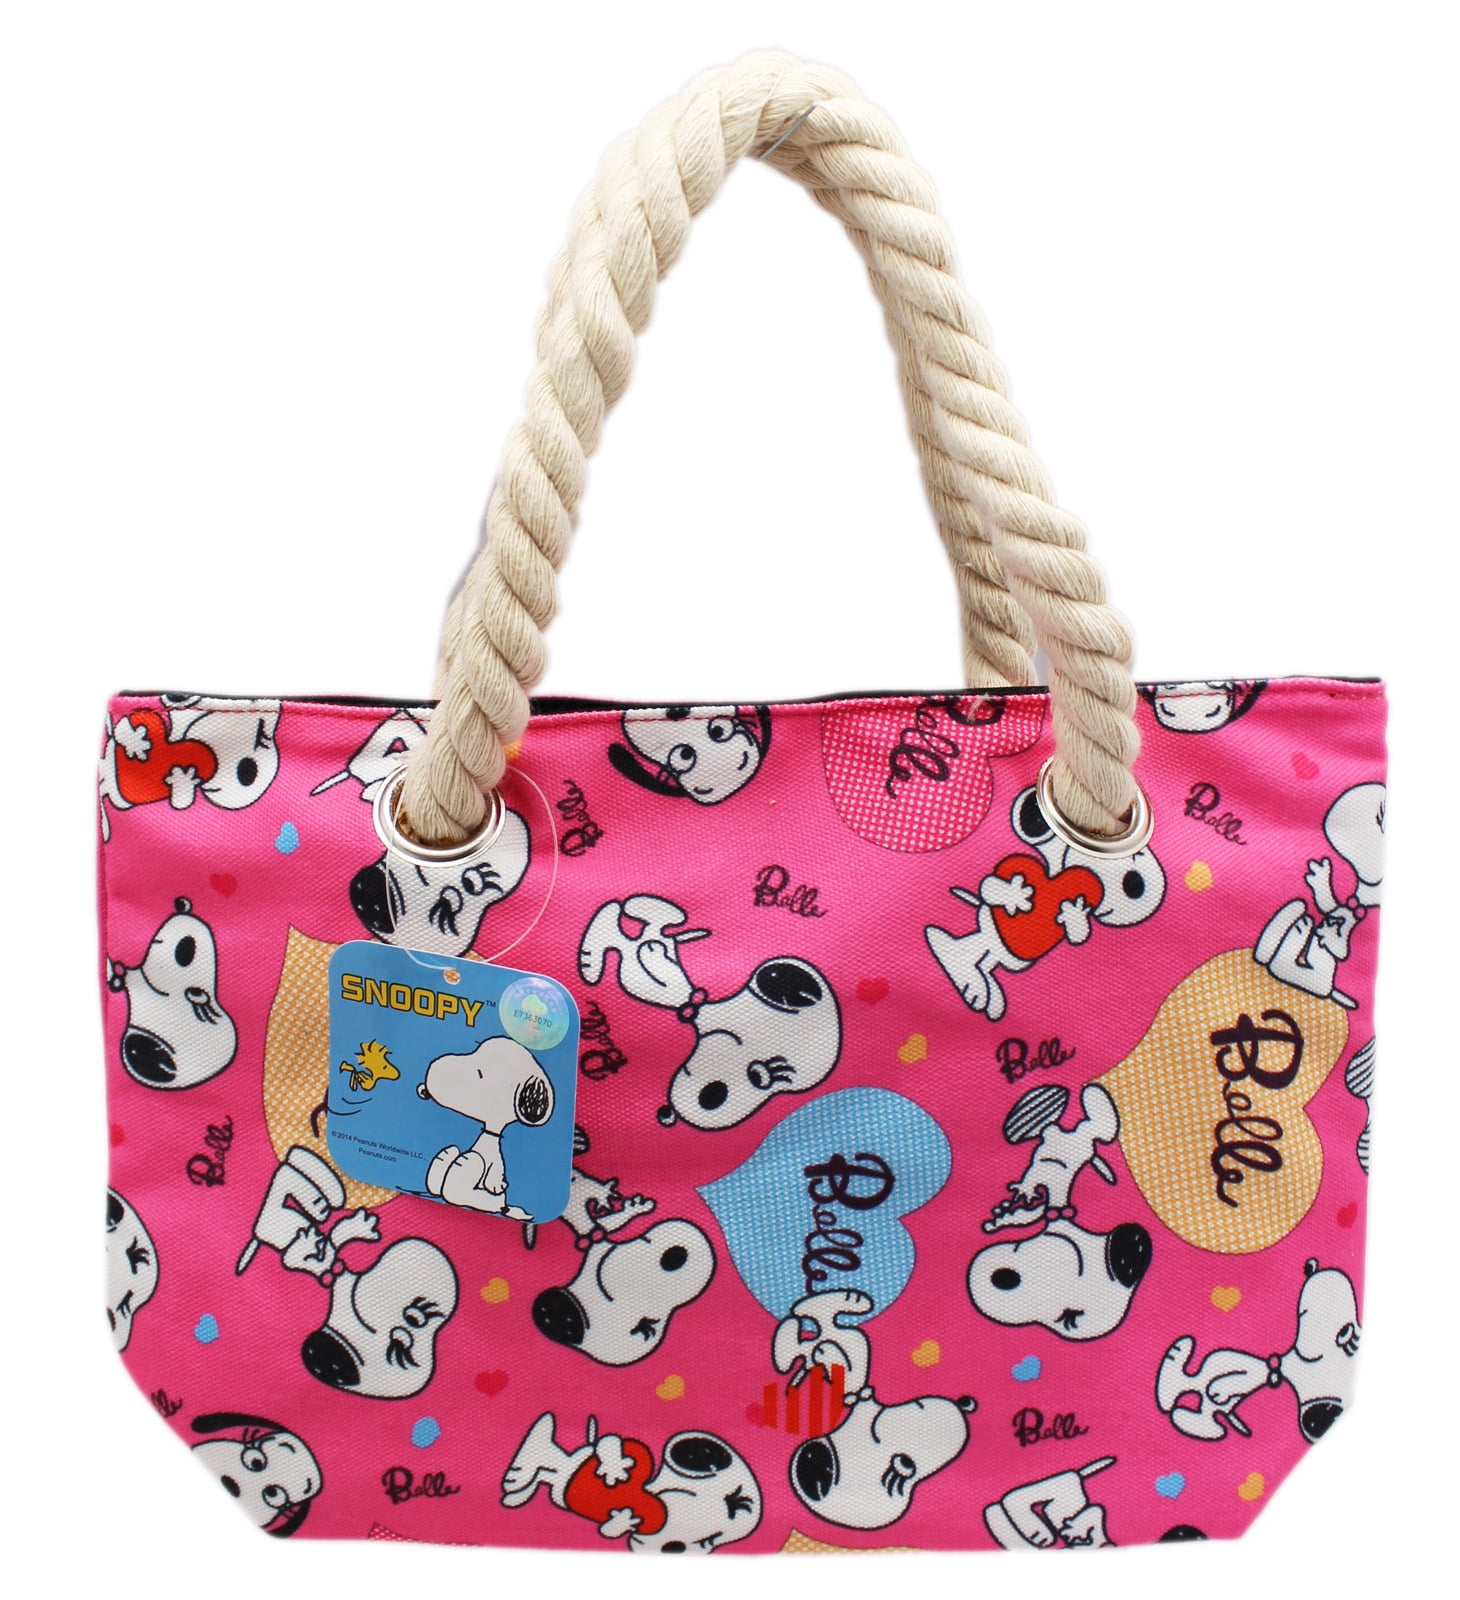 Cute Snoopy & Woodstock Crossbody Bag Suitcase Style Clutch Travel Casual Bags 